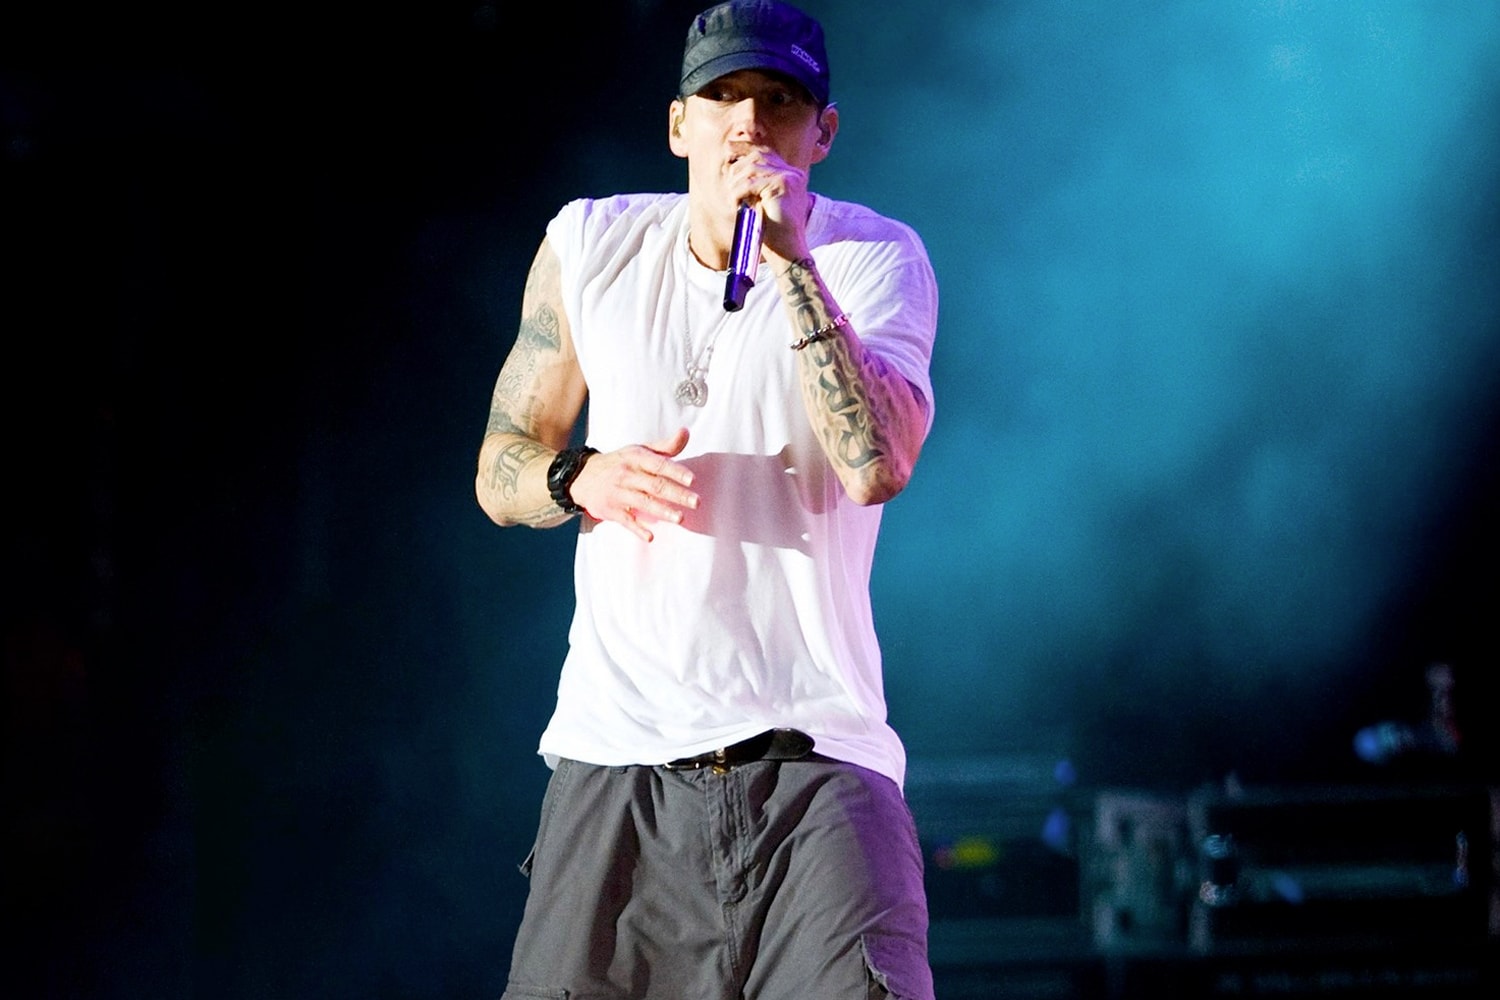 Eminem Donates Mom's Spaghetti to Medical Workers detroit henry ford health system marshall mathers foundation detroit receiving hospital coronavirus lose yourself 